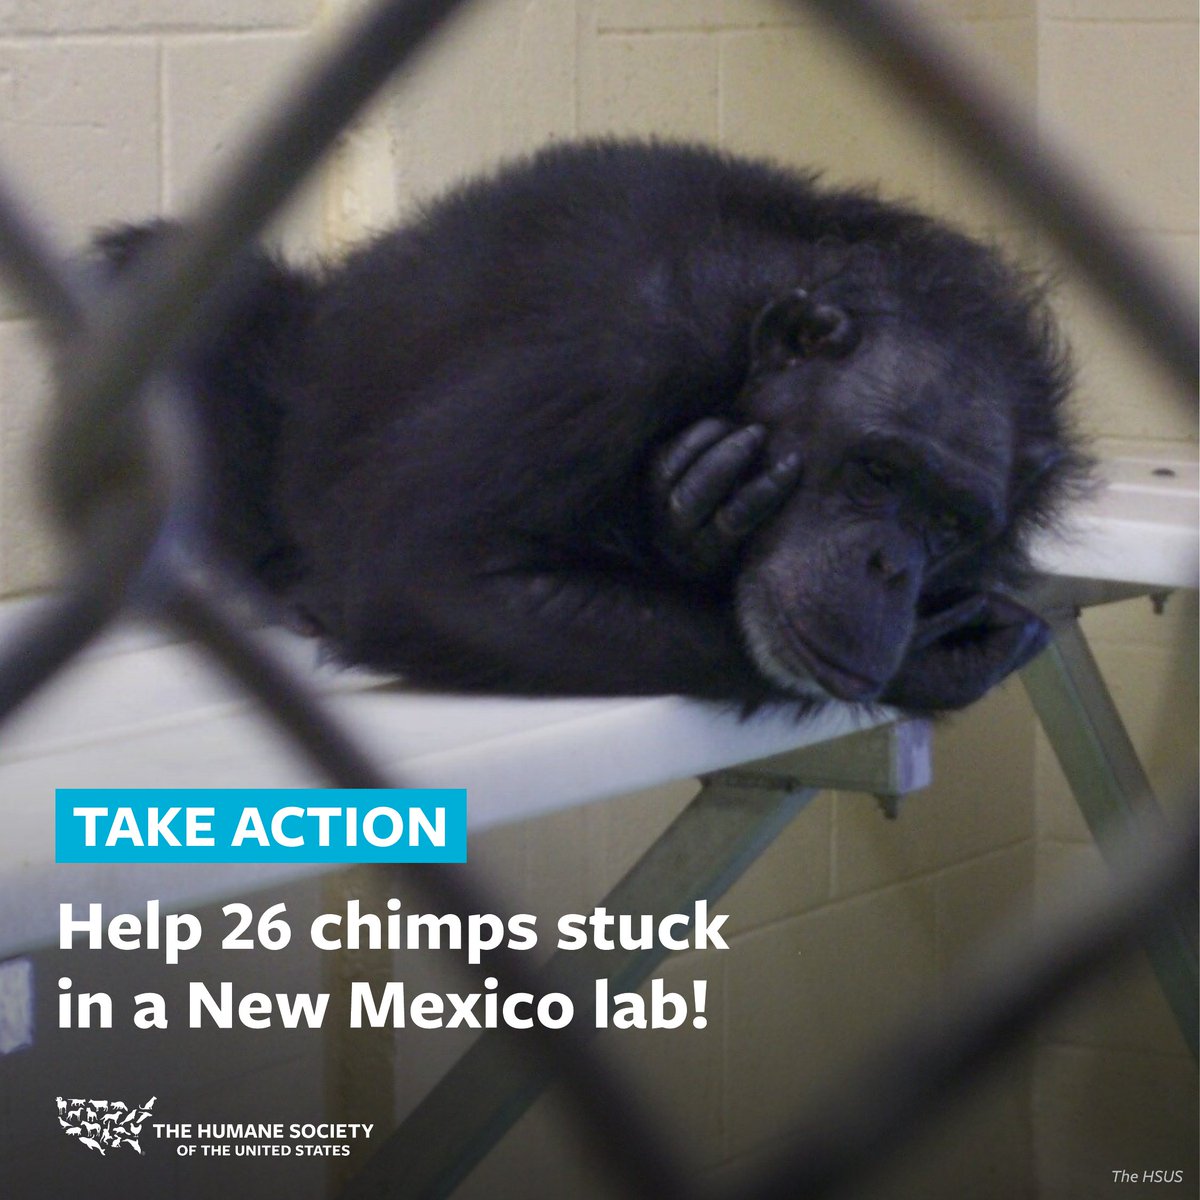 We sued the National Institutes of Health (@NIH). We won. But the NIH still refuses to move the 26 chimps used in harmful experiments at a New Mexico laboratory to @ChimpHaven sanctuary. Don’t let these innocent animals spend their last days in a lab. Tell @NIH to follow the